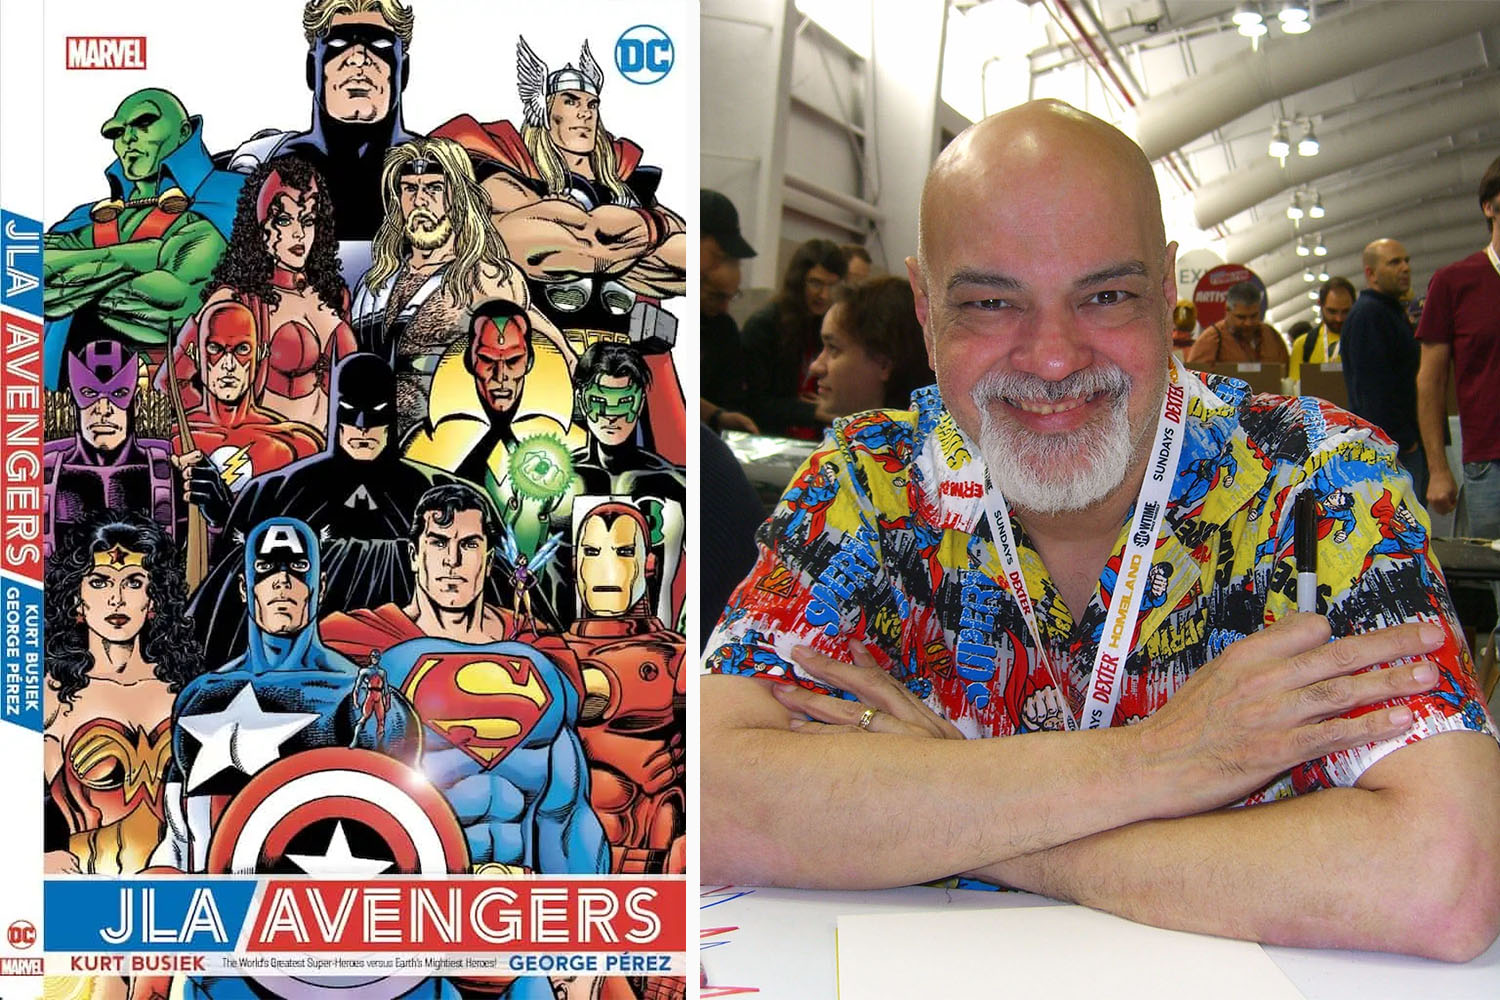 Marvel/DC crossover 'JLA/Avengers' is being reprinted in honor of George Pérez